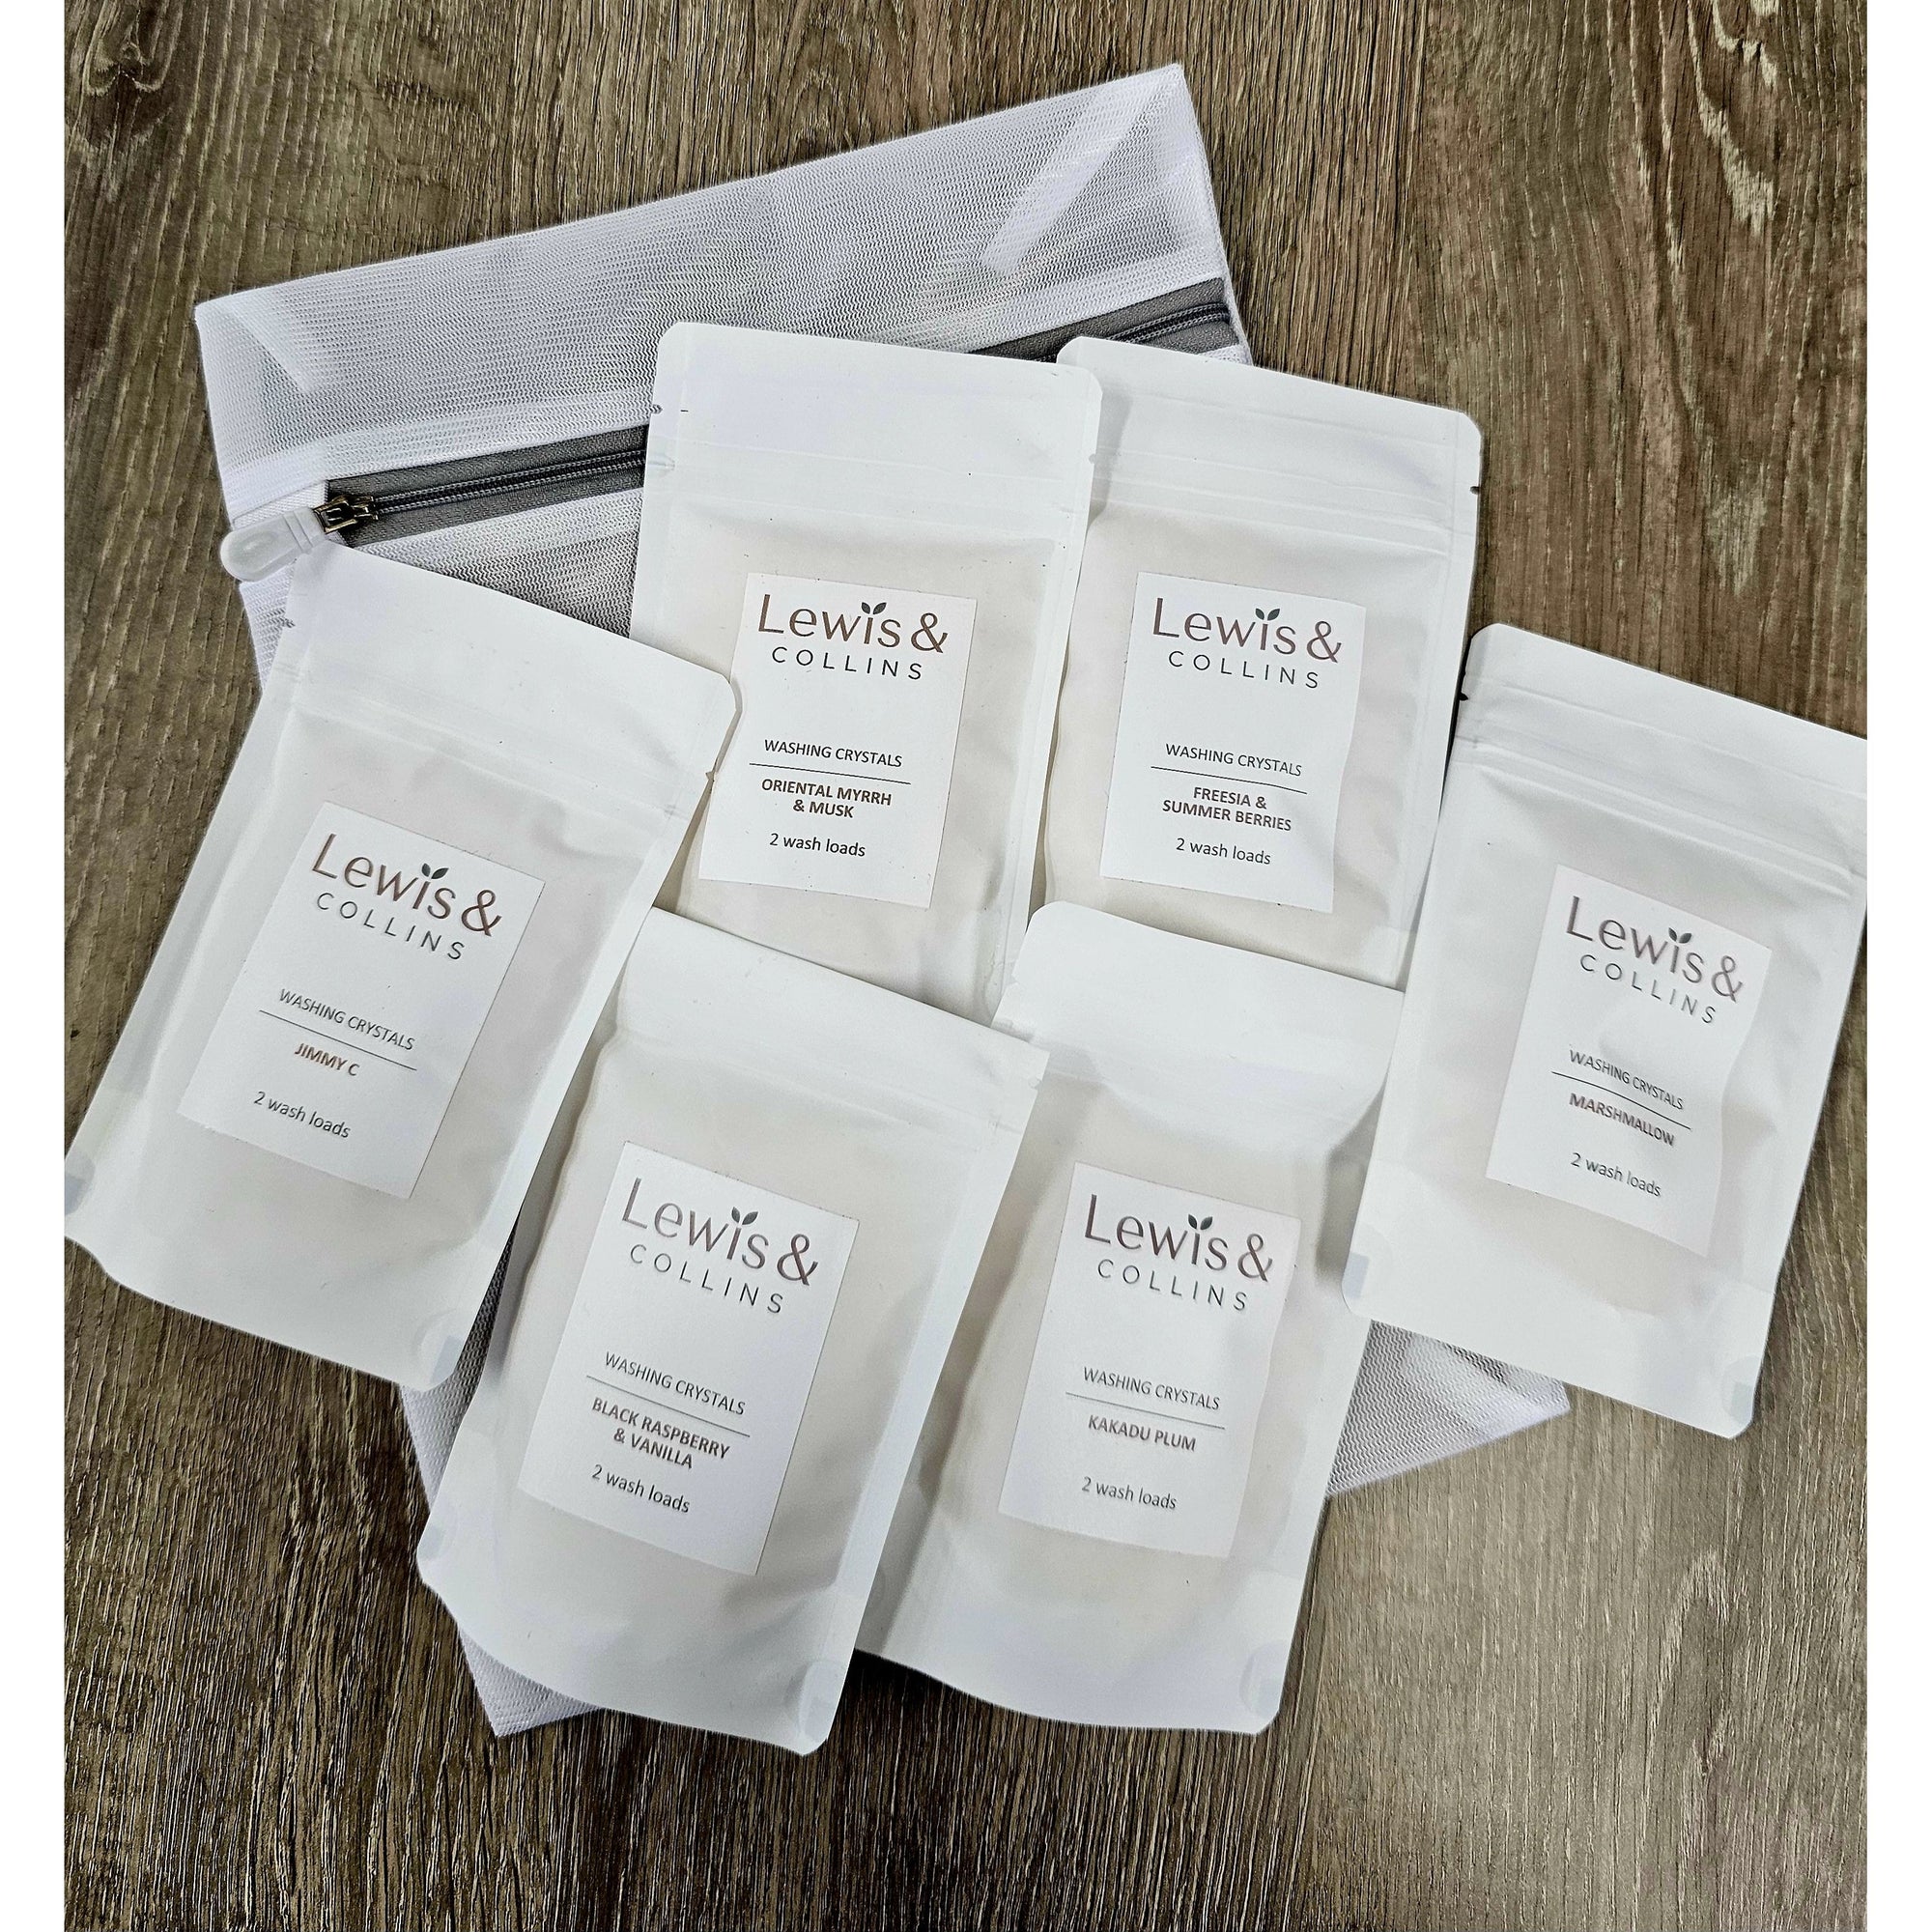 Lewis & Collins Washing Crystals Samplers in Laundry Bag